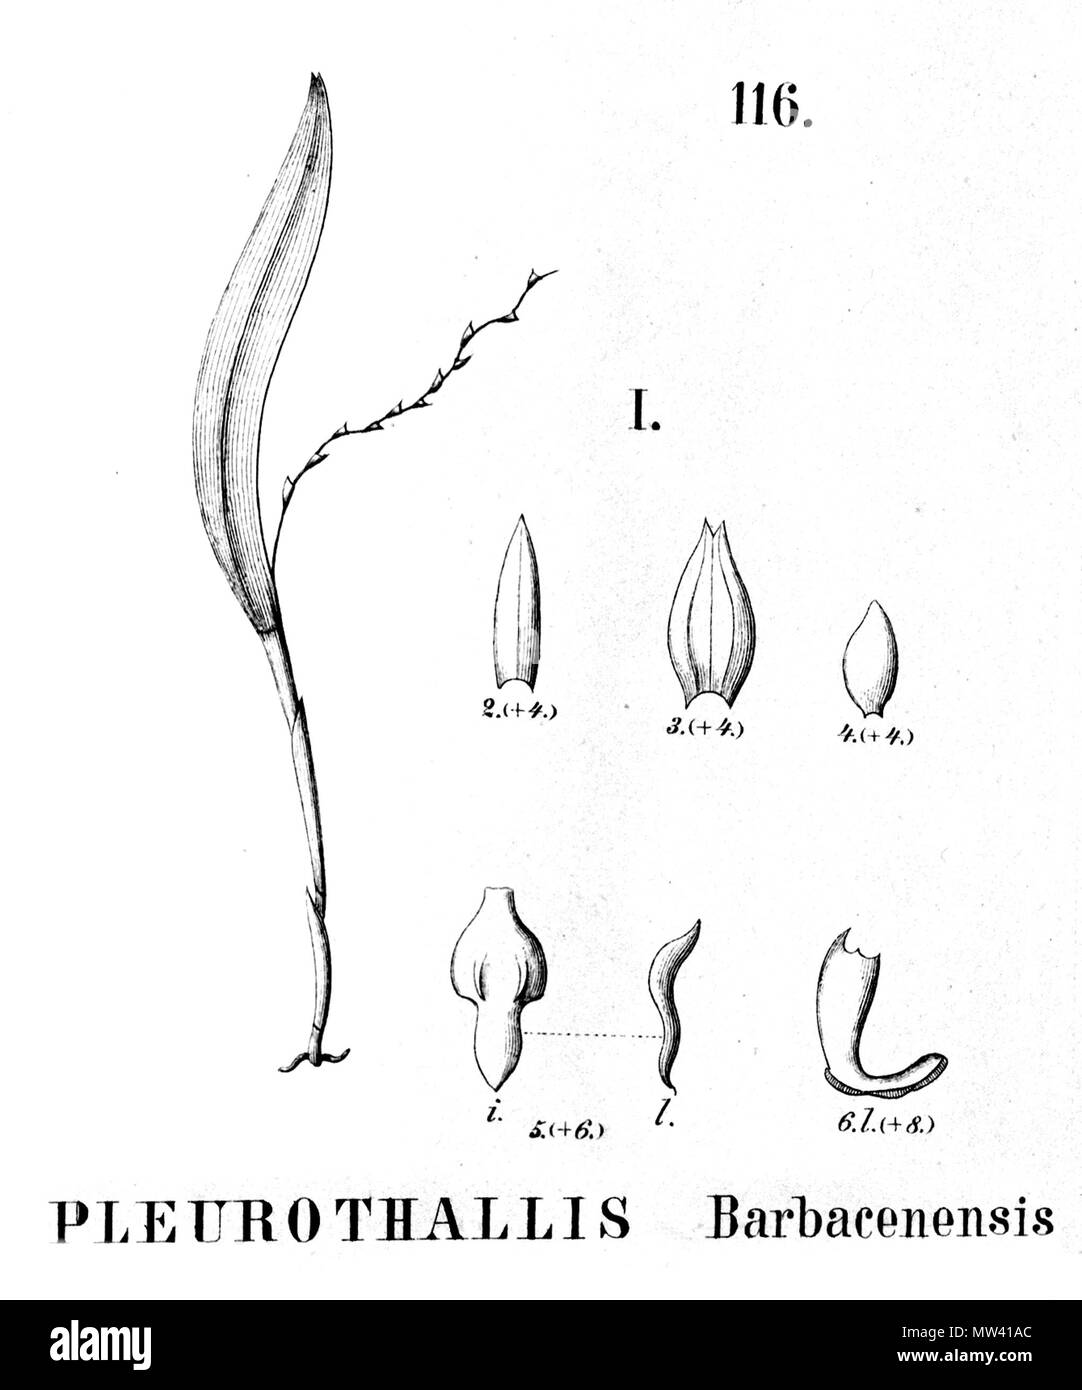 . Illustration of Acianthera hygrophila (as syn. Pleurothallis barbacenensis) . between 1893 and 1896. Alfred Cogniaux (1841 - 1916) 25 Acianthera hygrophila (as Pleurothallis barbacenensis - cut from Fl.Br.3-4-116 - fig. I Stock Photo